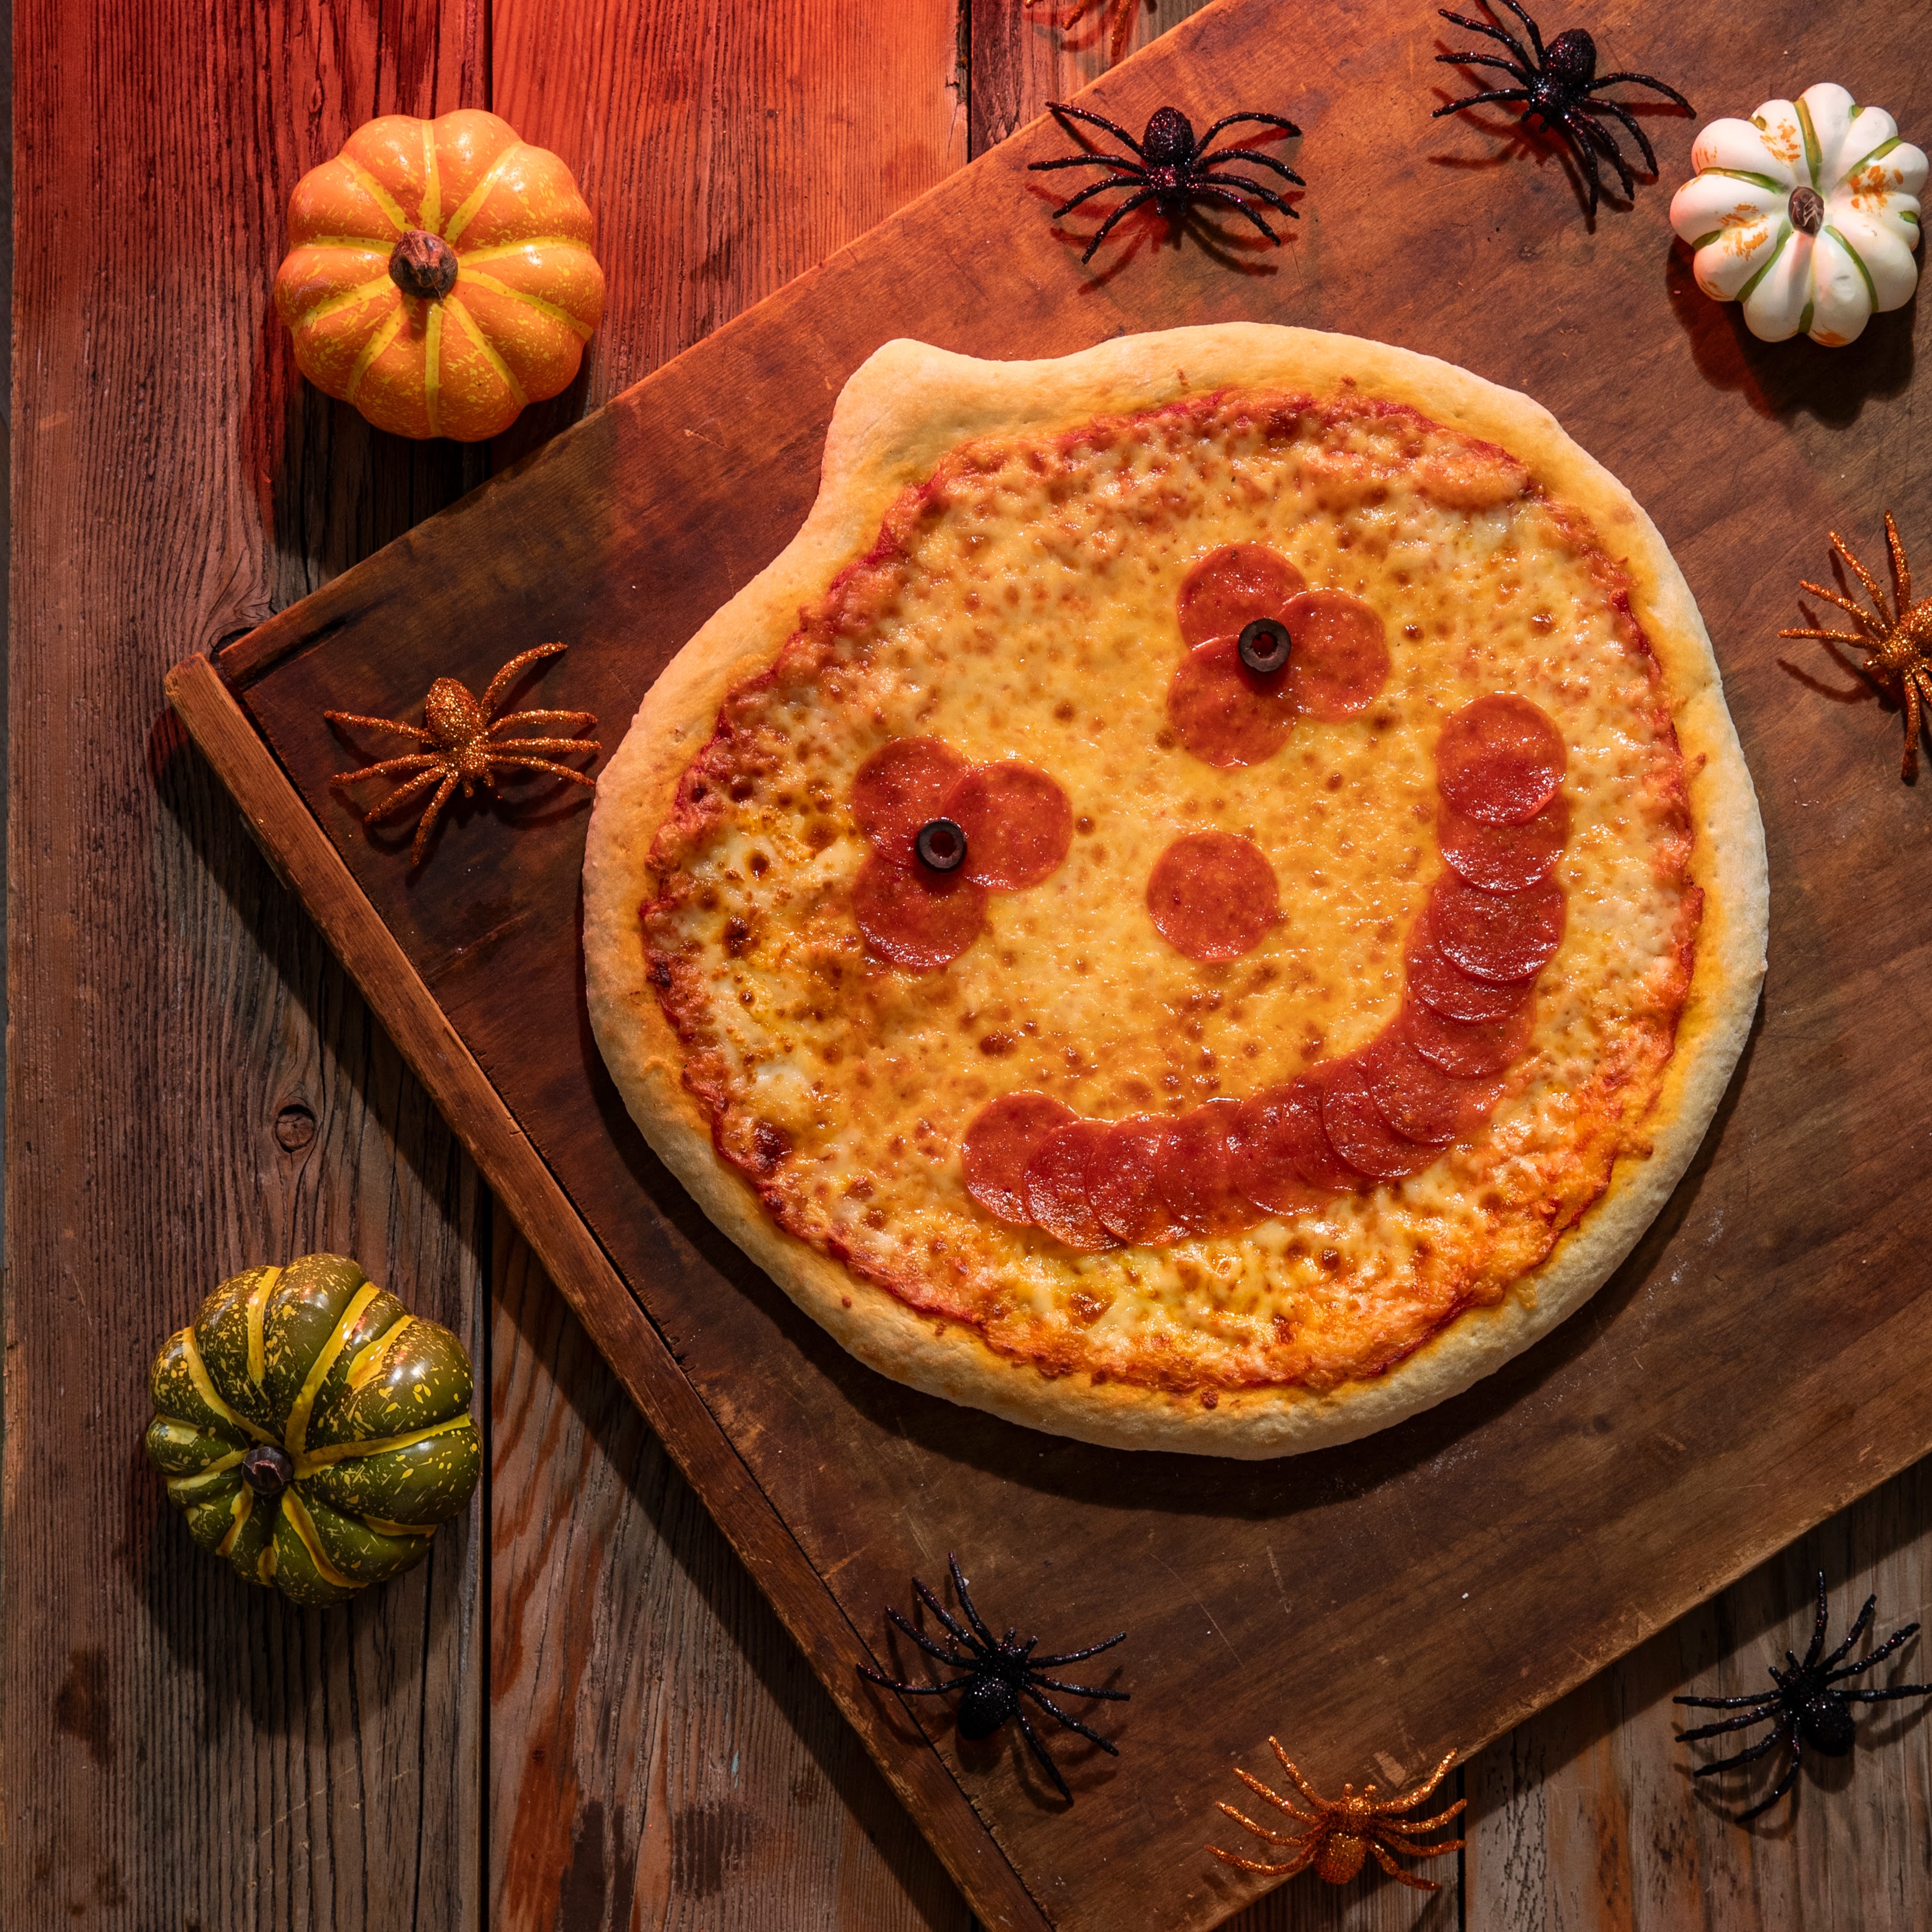 Casey's Jack-O'-Lantern Pizza on a spooky backdrop with plastic spiders and pumpkins